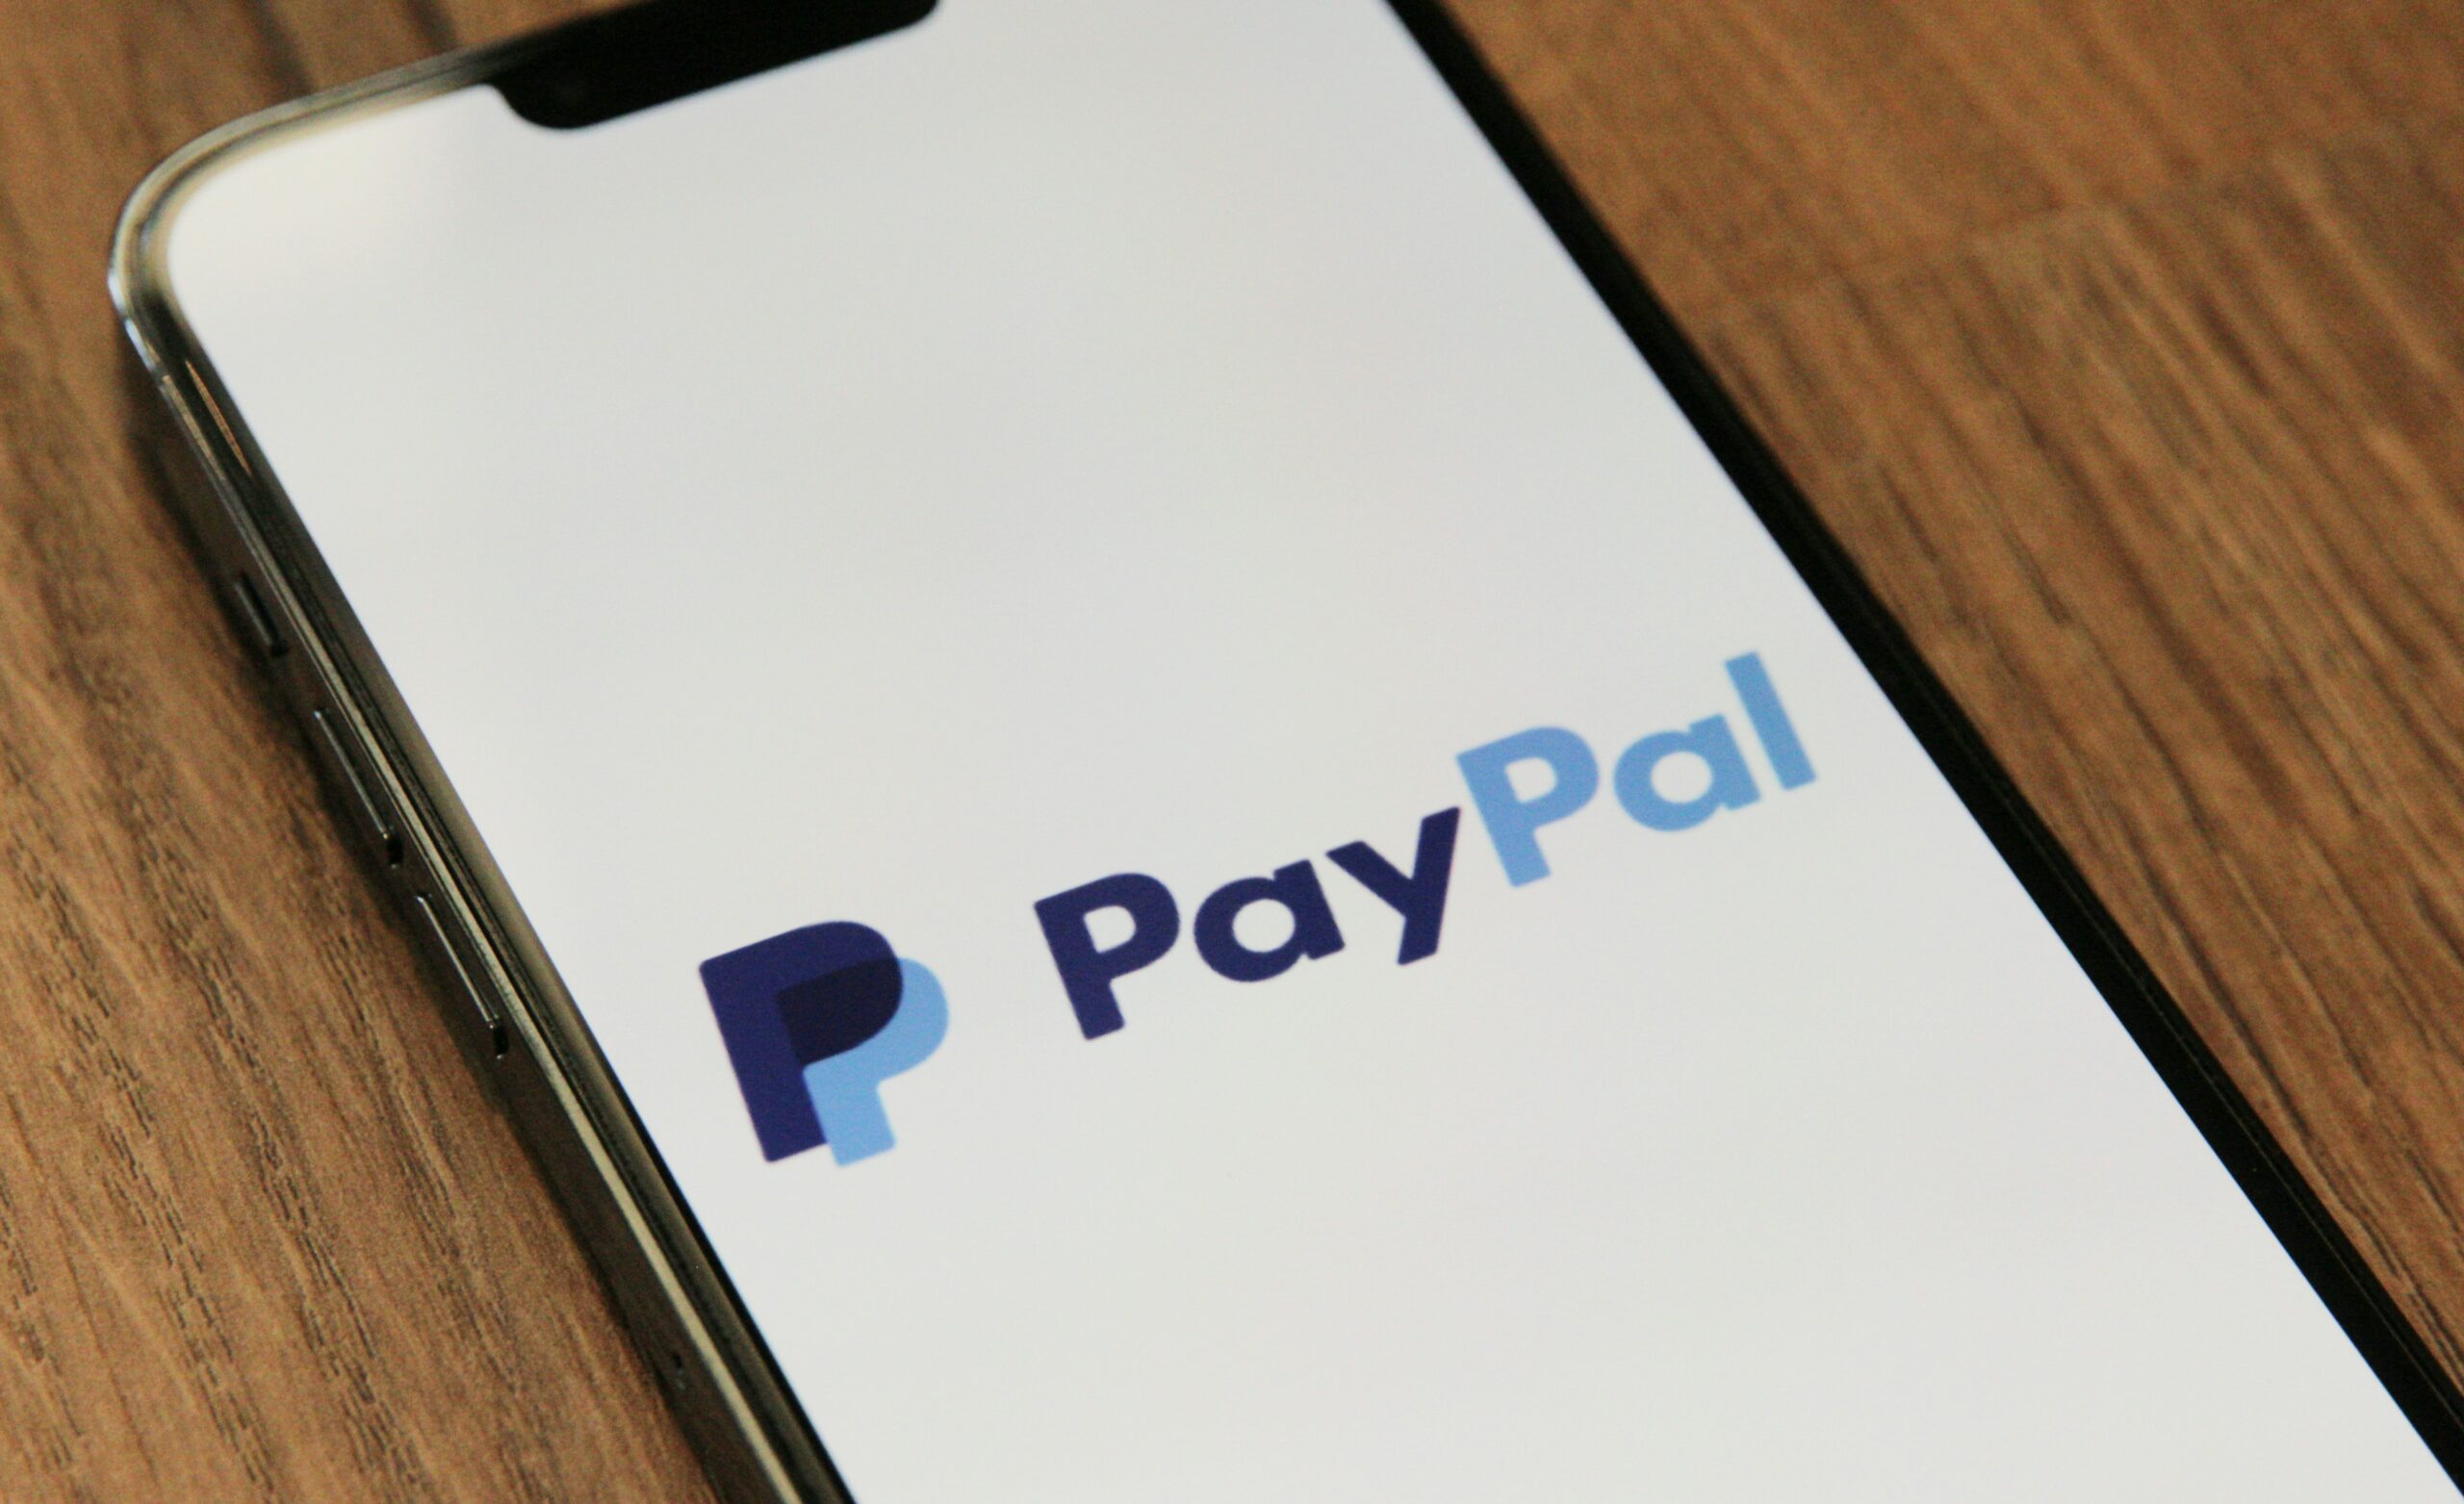 PayPal on a phone